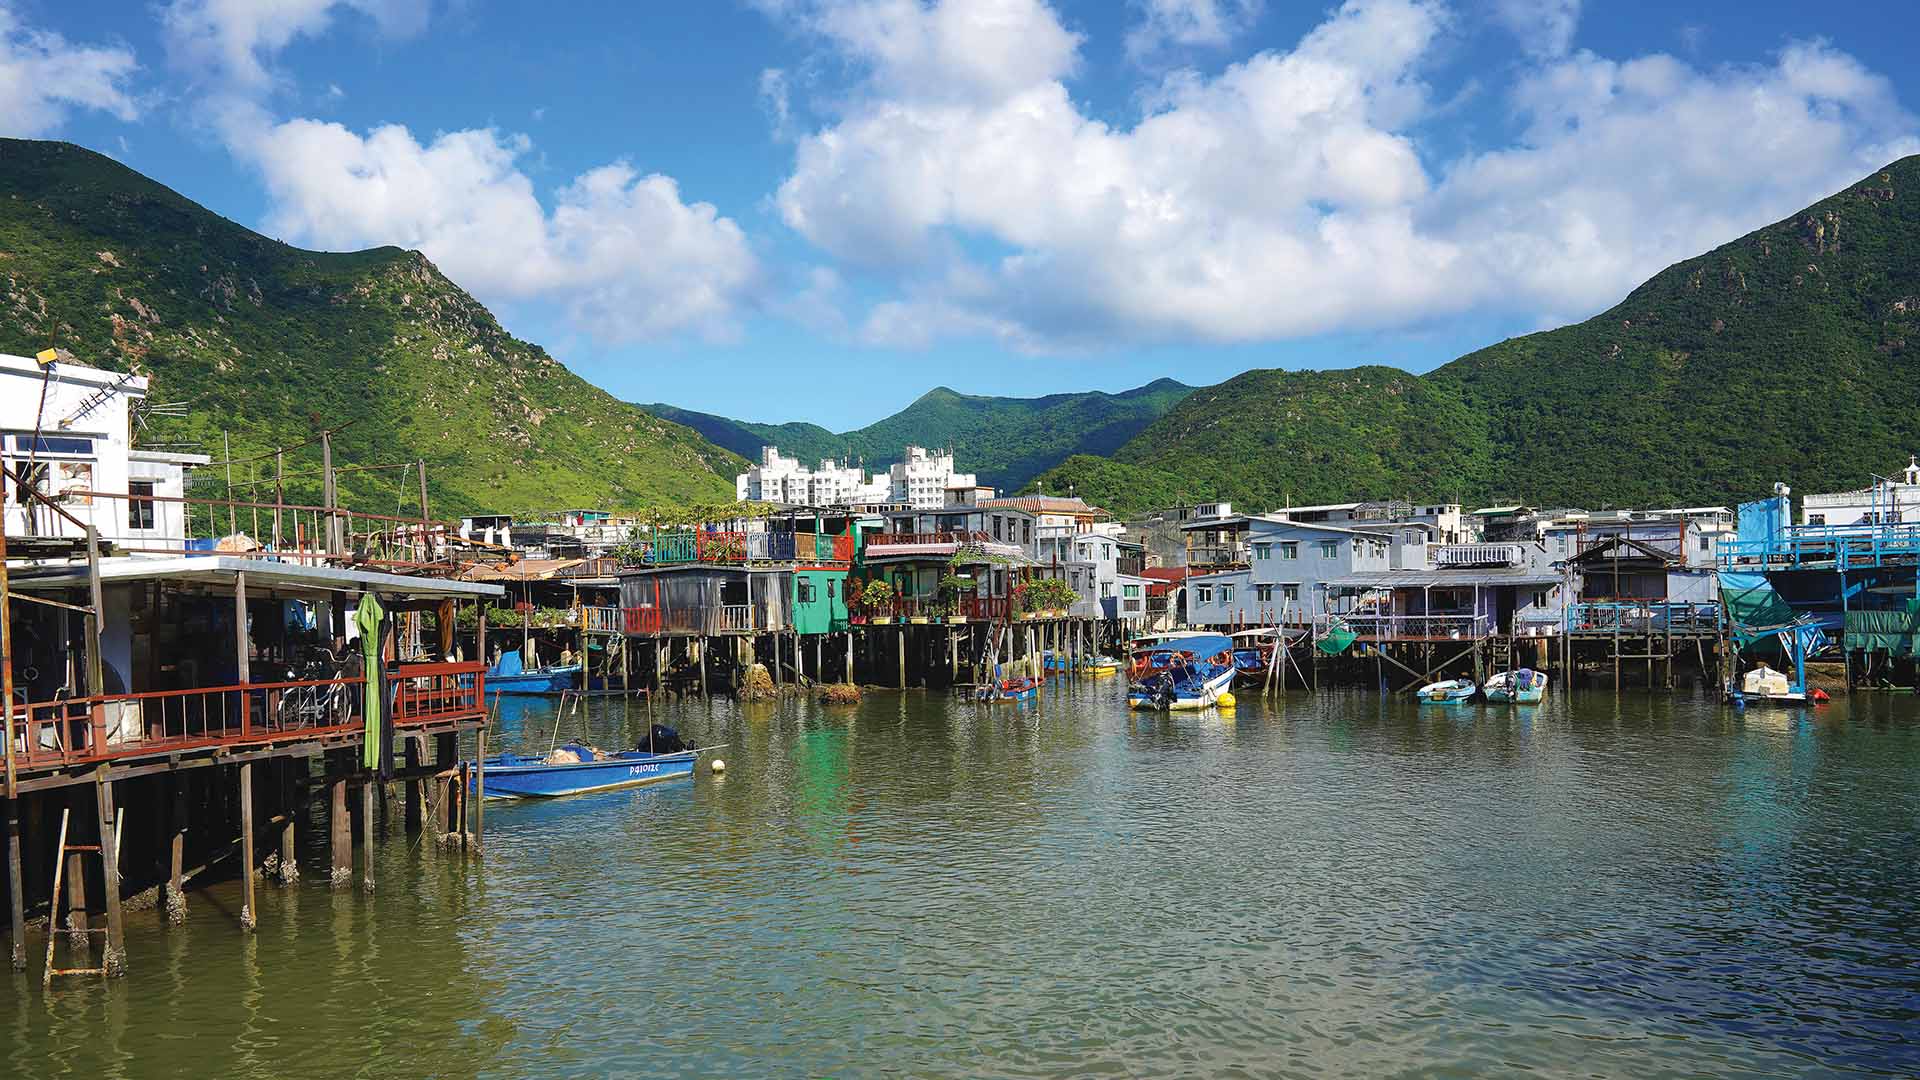 Hong Kong has a number of hidden islands that are worth visiting